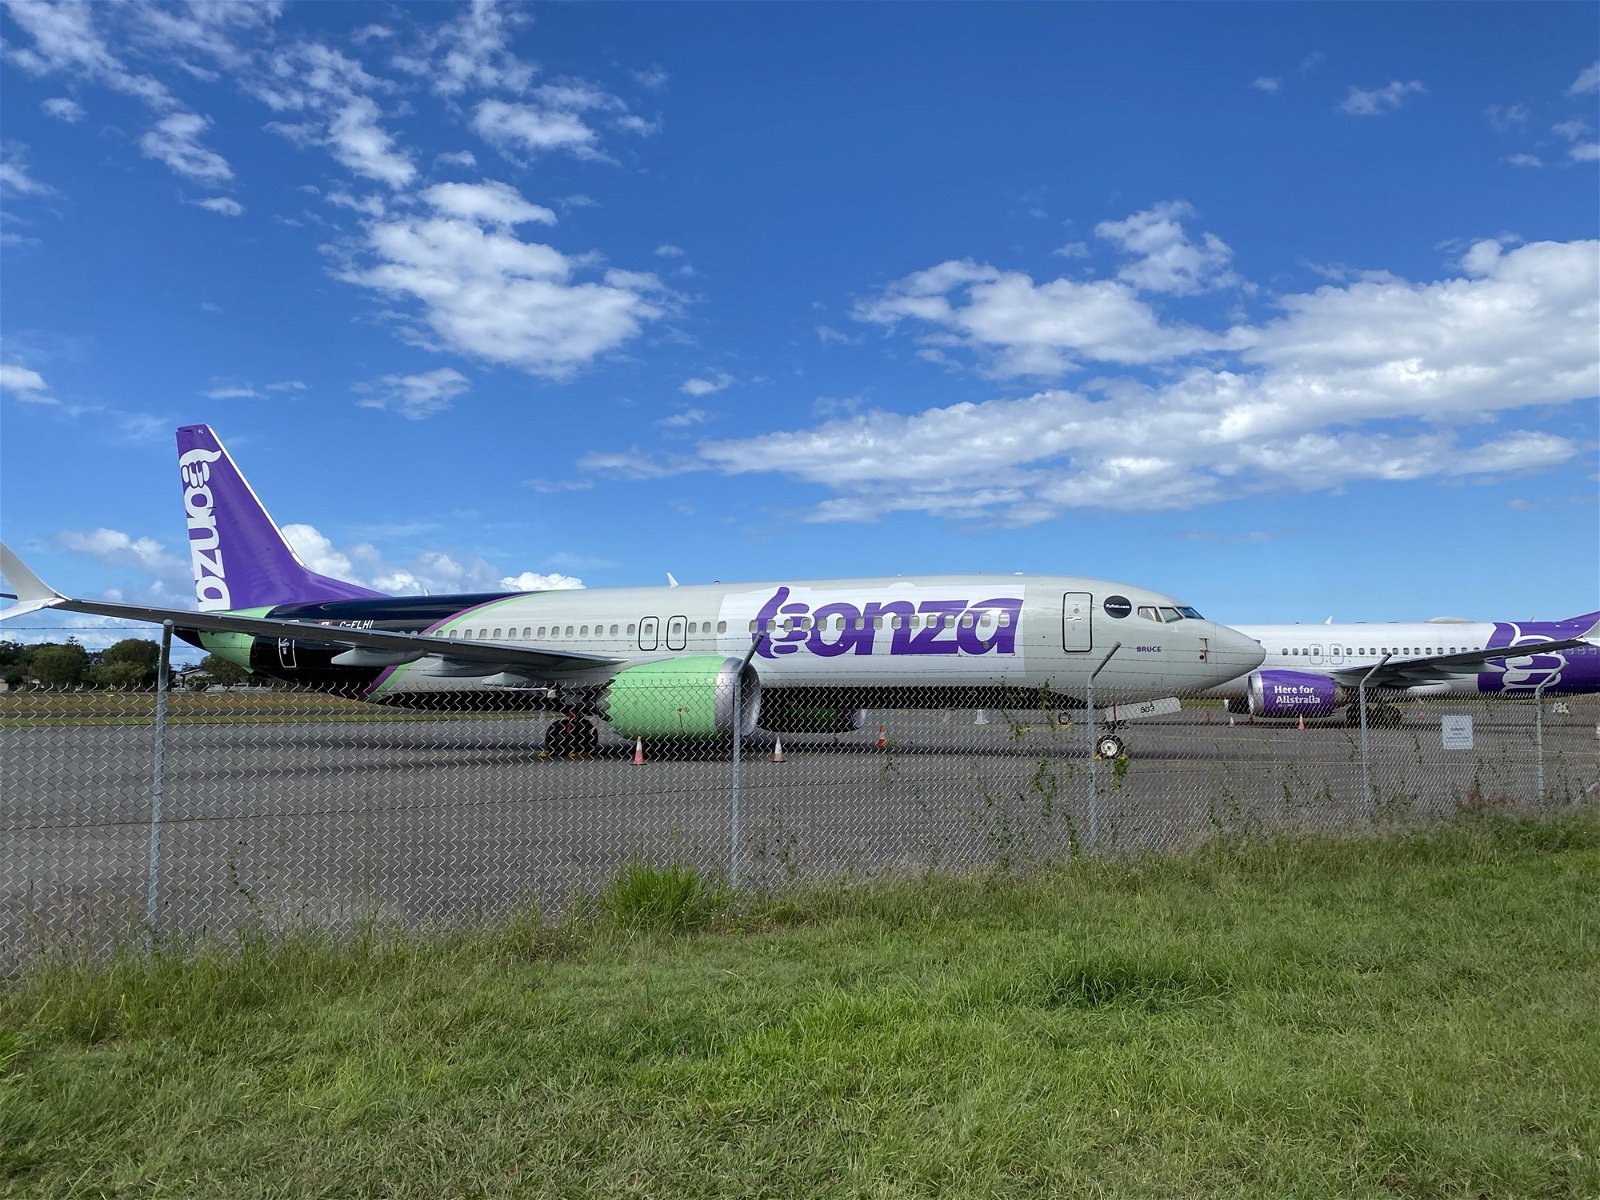 Image of gras, a gate and behind it, a Bonza airplane.